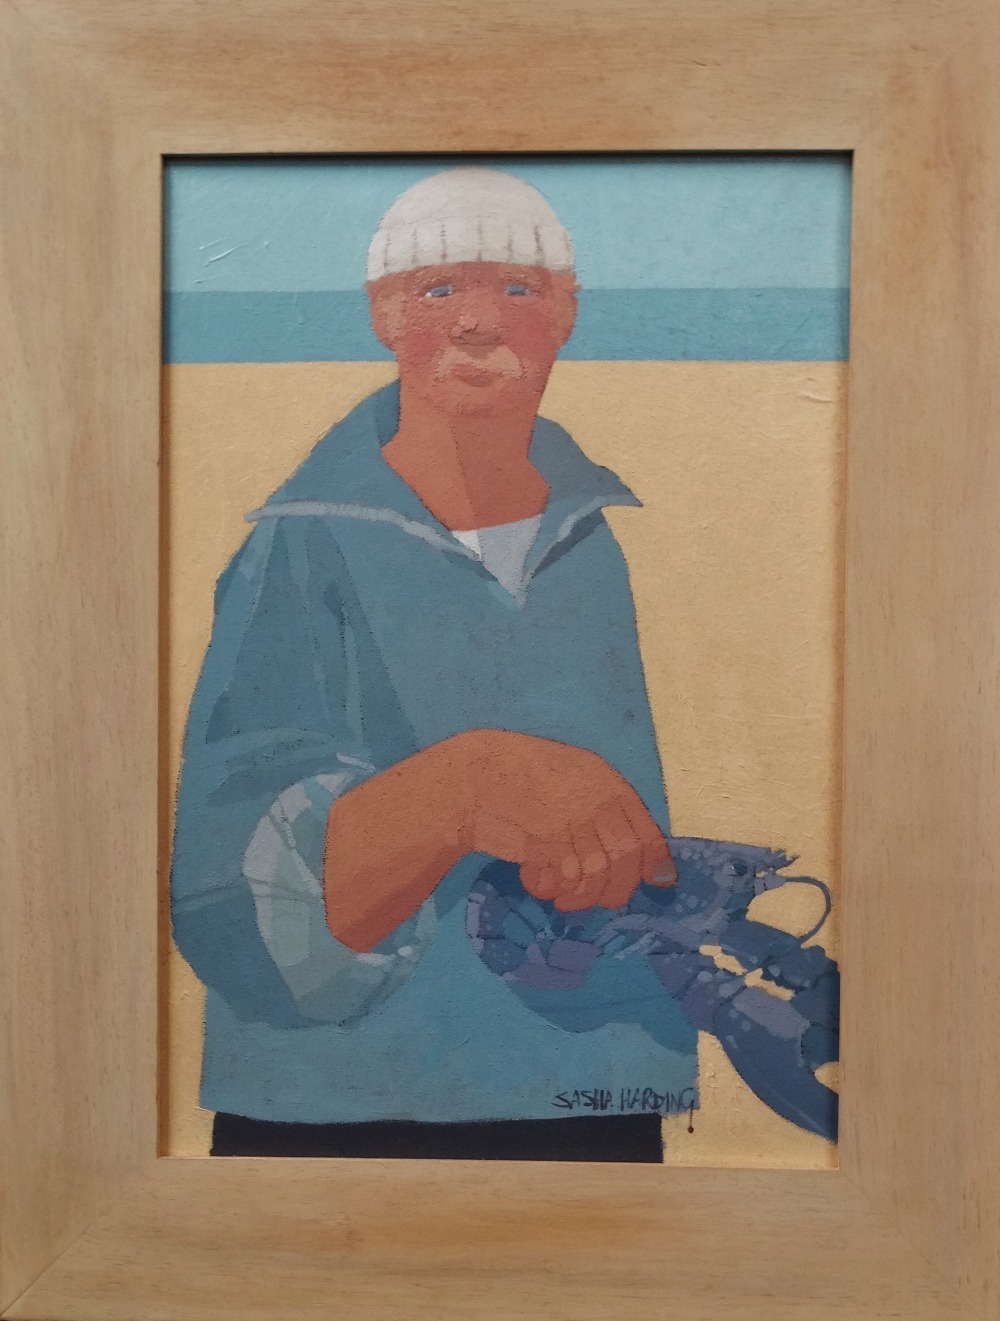 SASHA HARDING (1973) Lobster Man Oil on canvas Signed Framed Picture size 43.5 x 29.5cm Overall size - Image 2 of 4